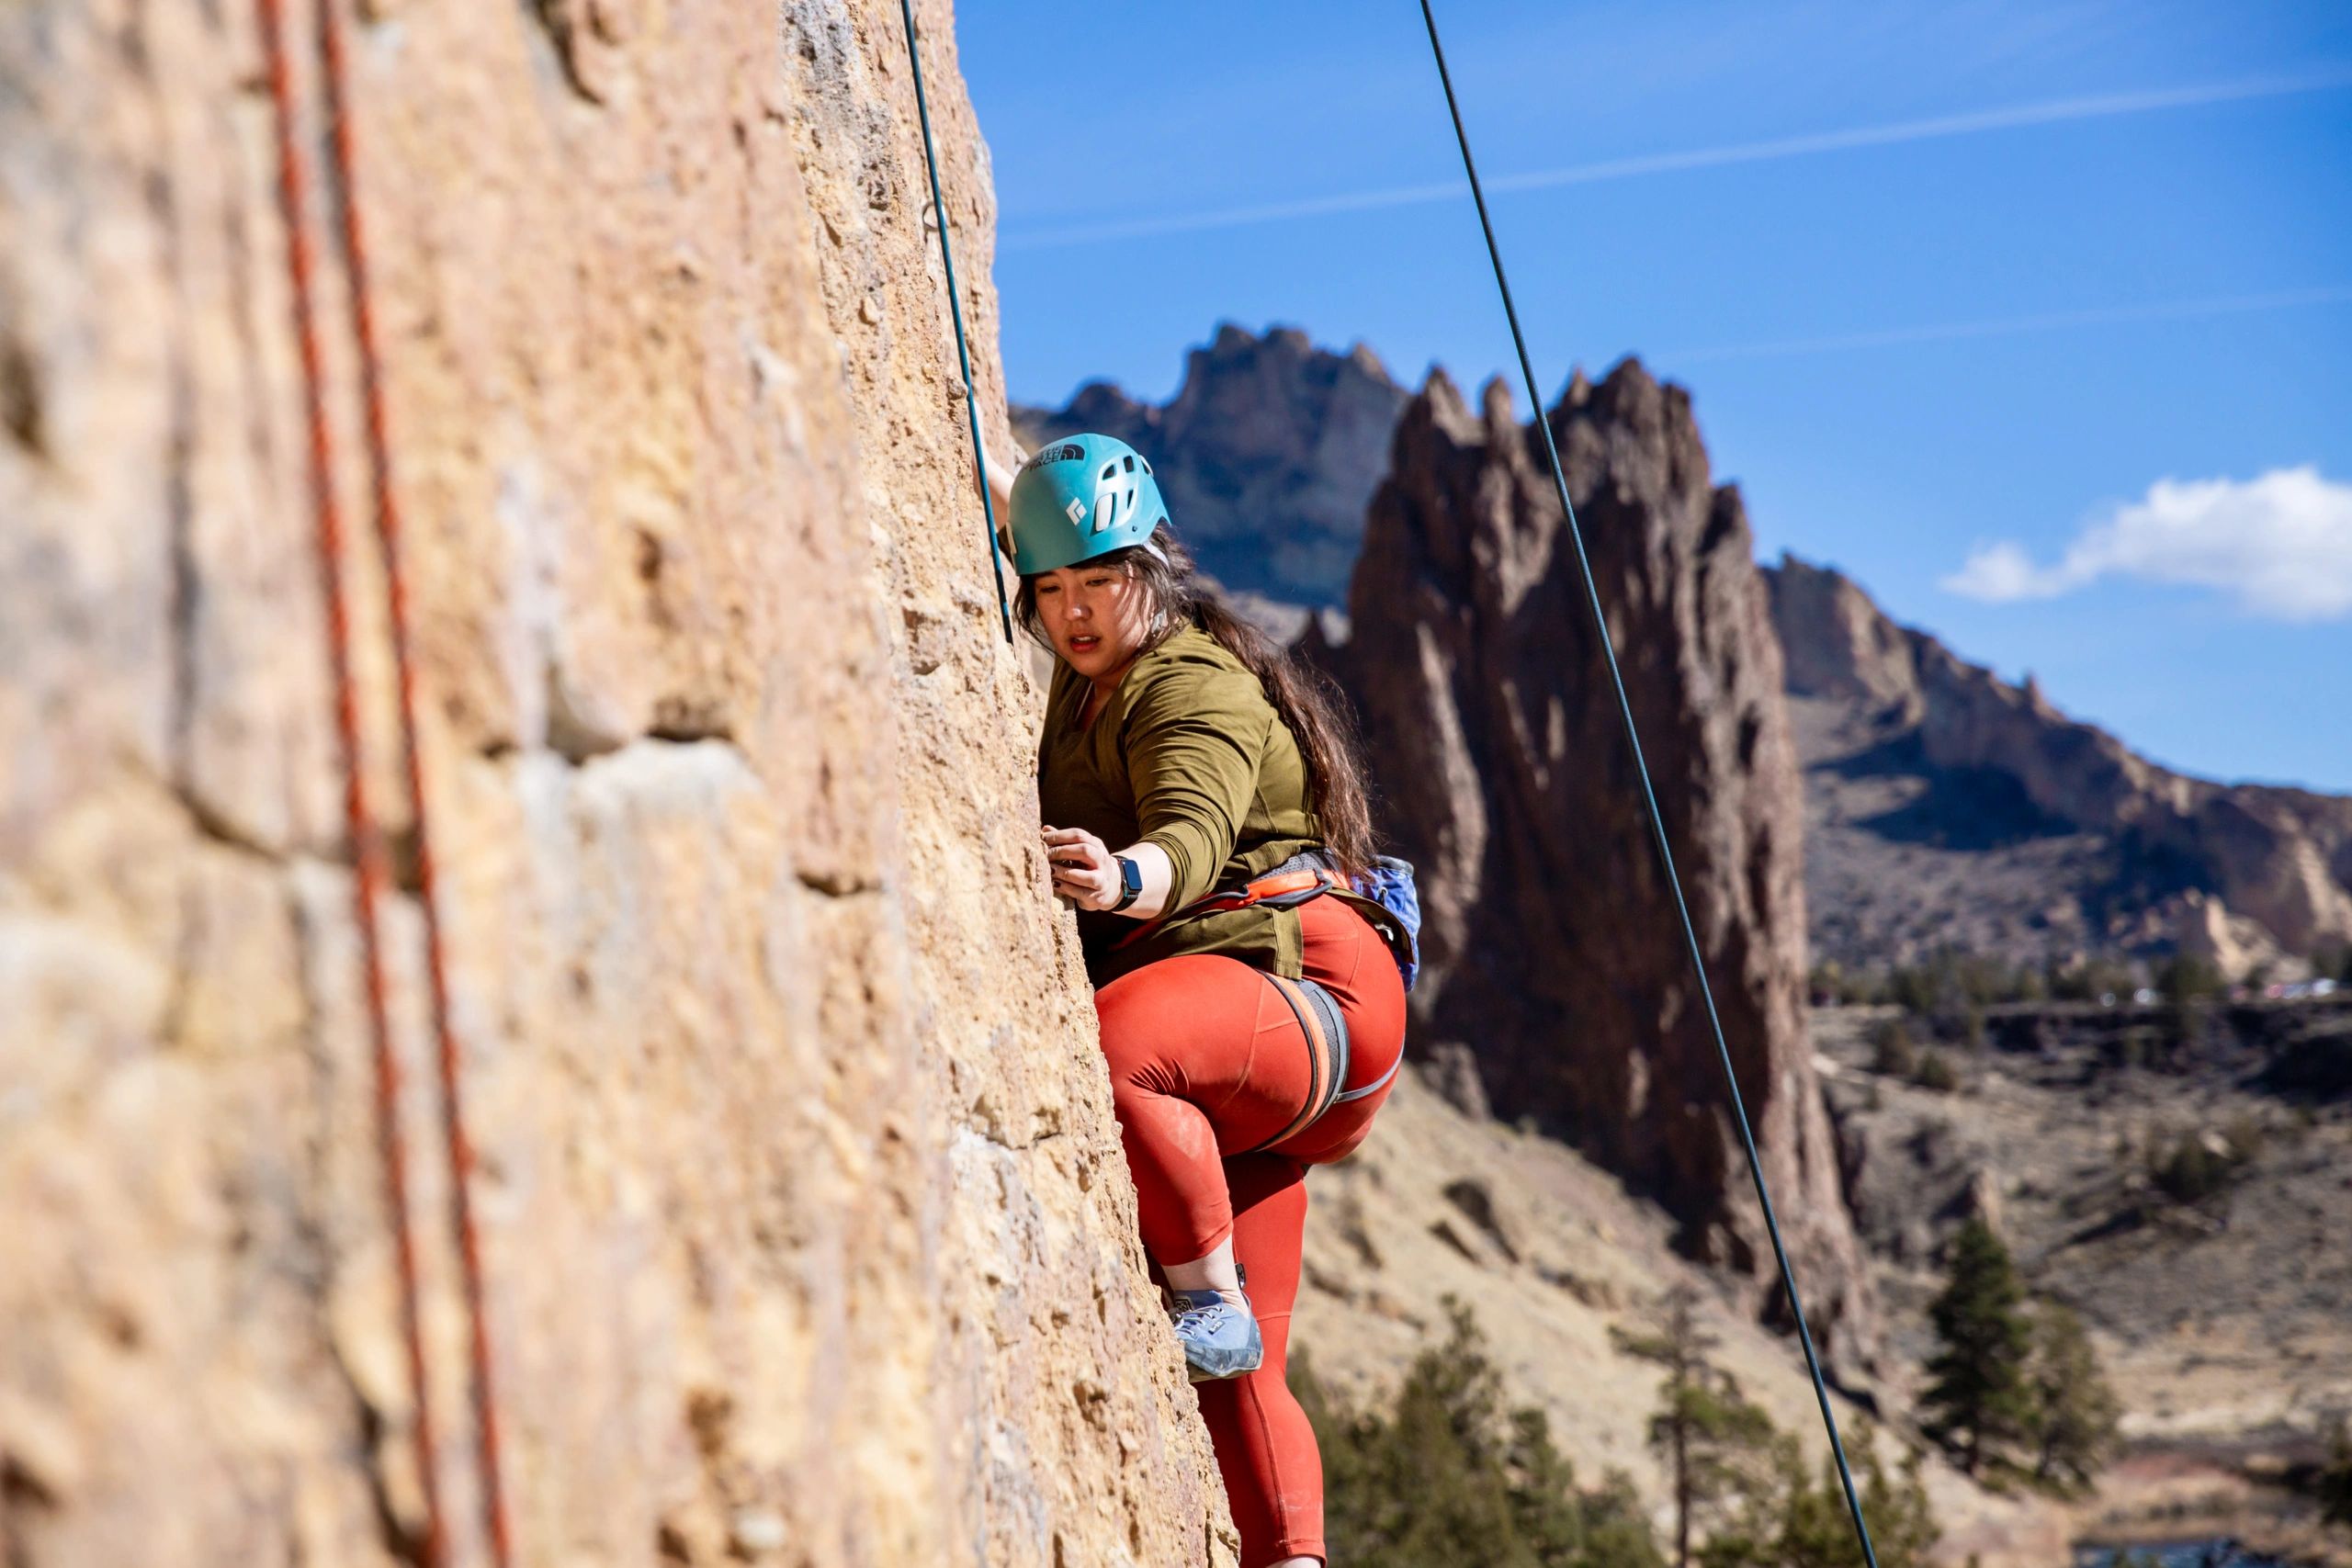 Getting started: sport climbing outdoors